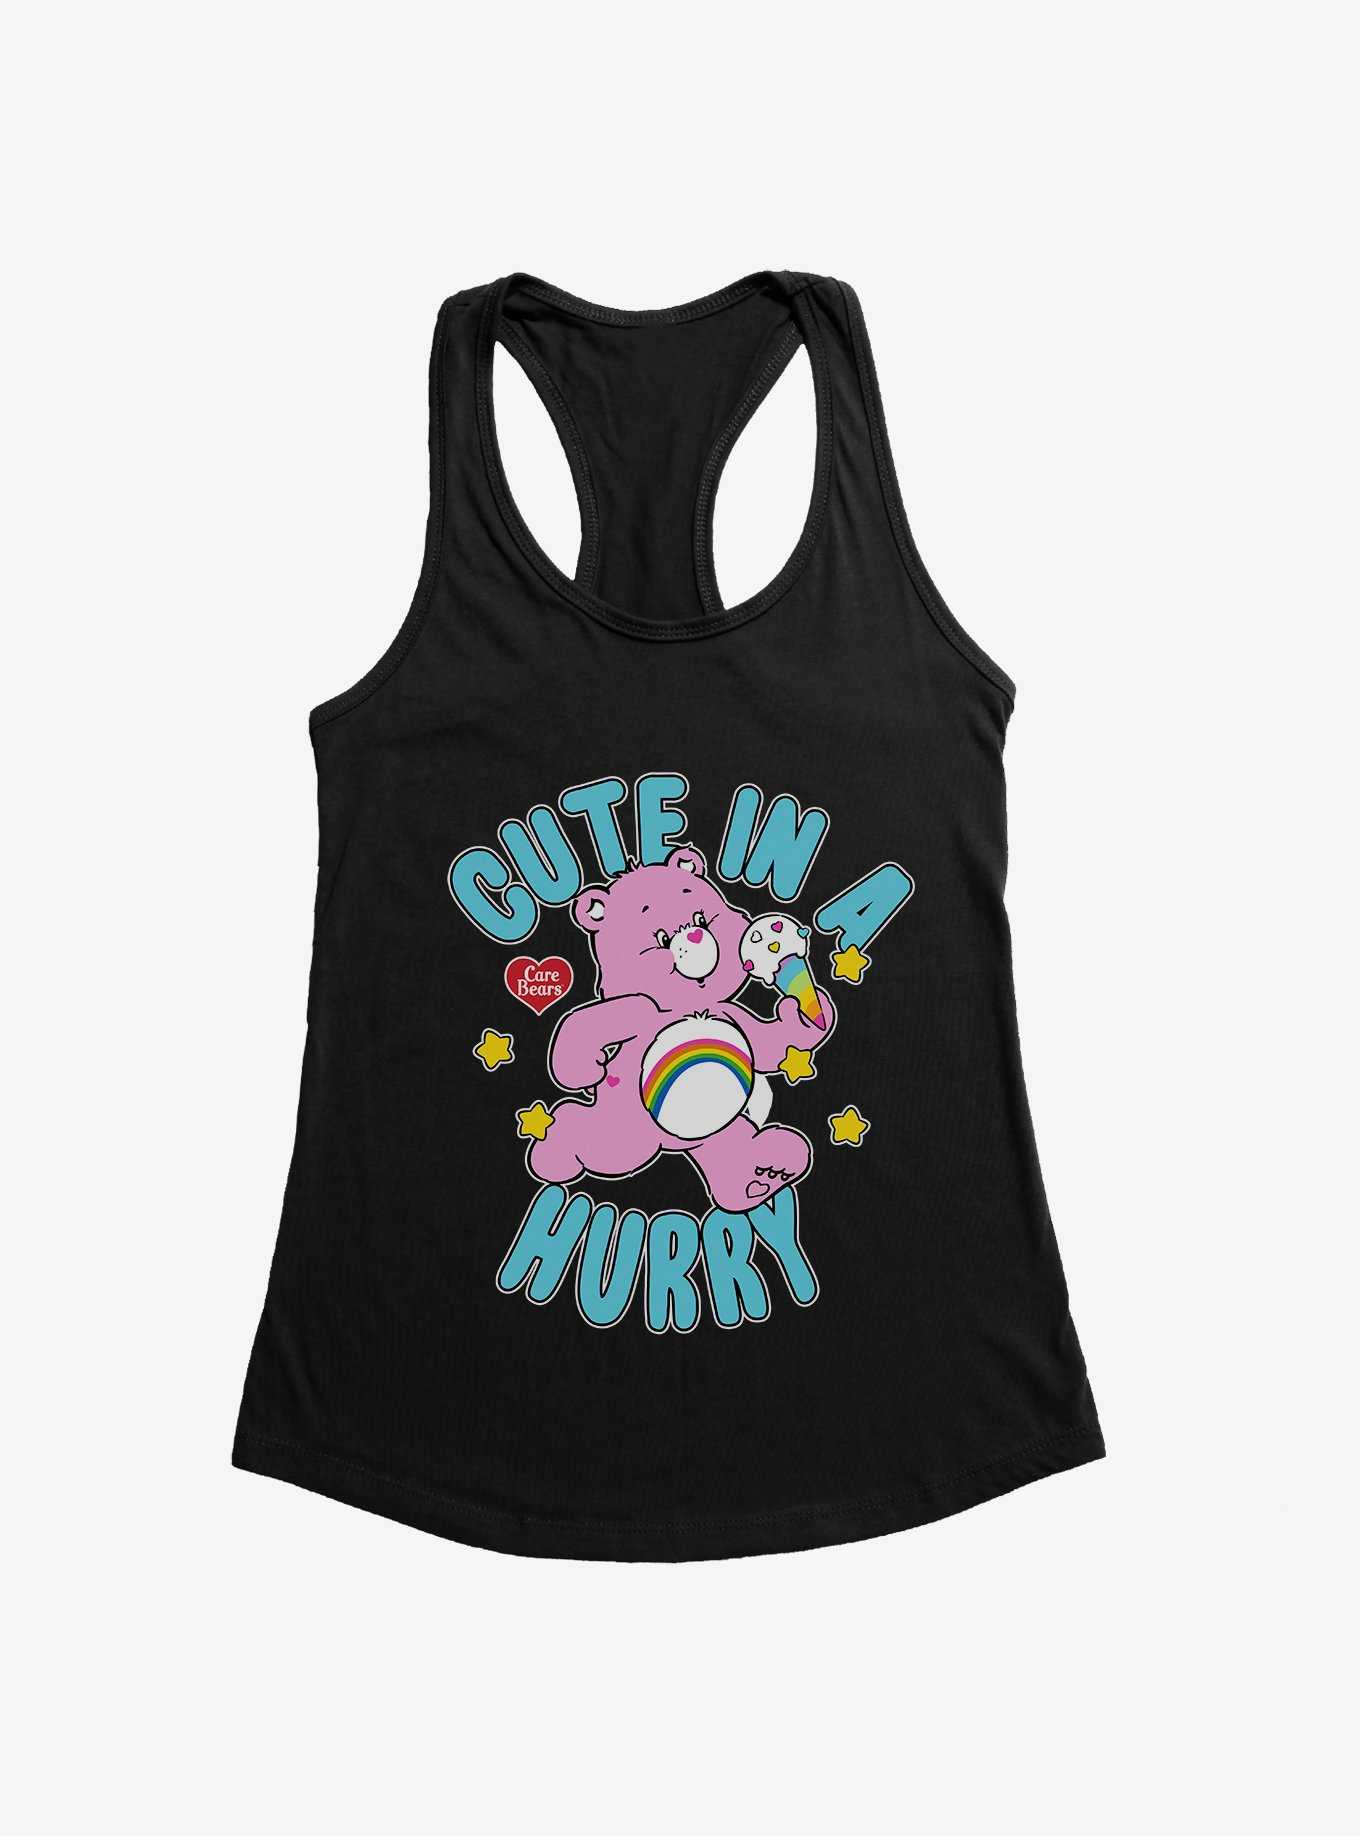 Care Bears Cute In A Hurry Womens Tank Top, , hi-res